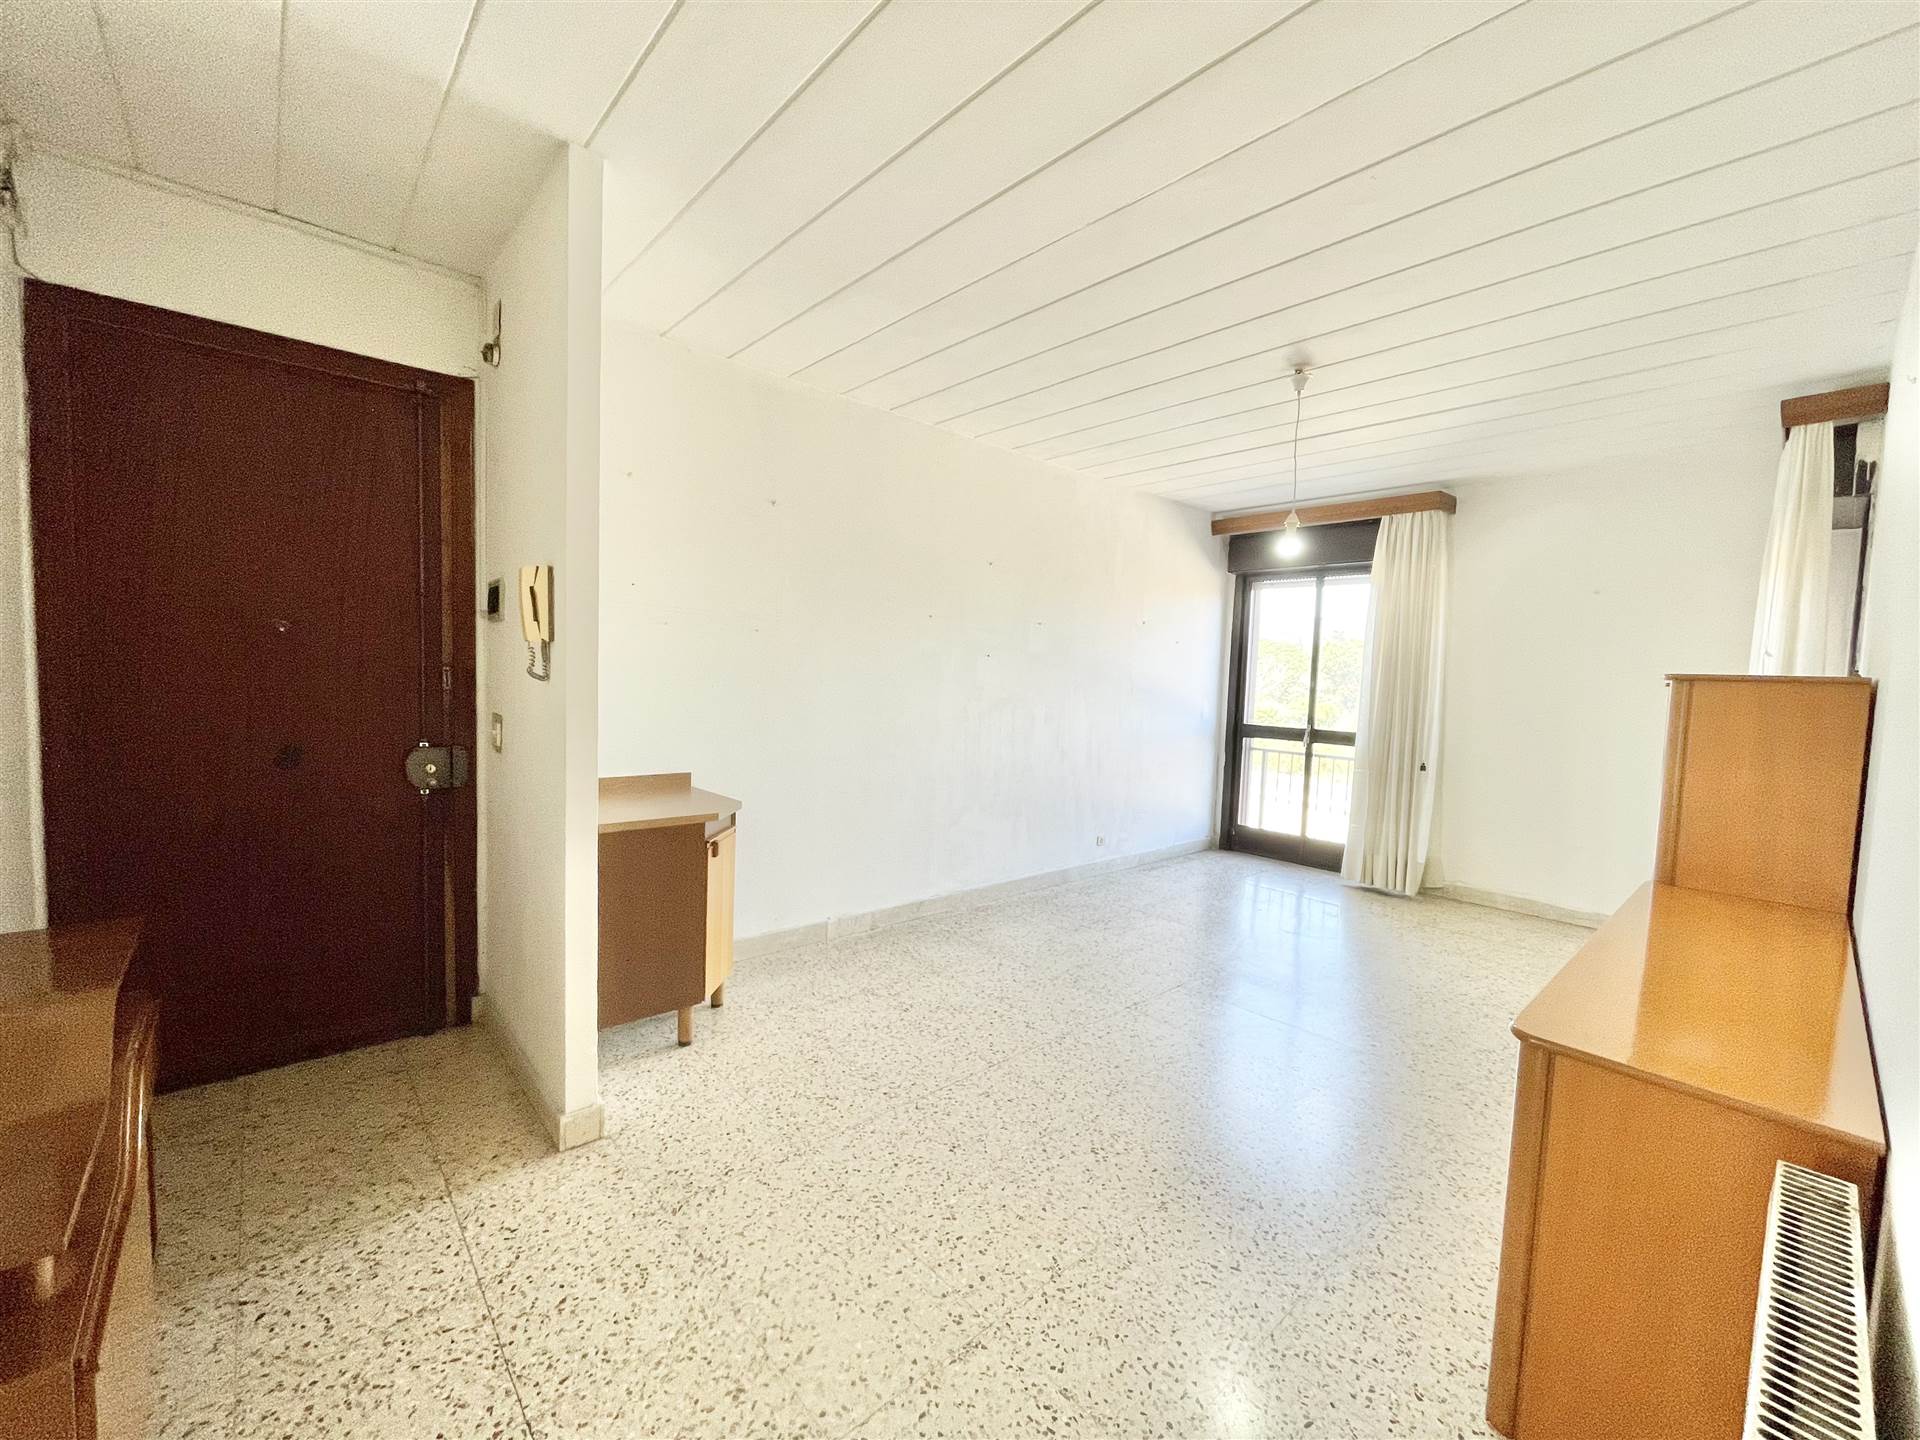 RIPOSTO, Apartment for sale of 110 Sq. mt., Good condition, Heating Individual heating system, Energetic class: G, placed at 1° on 3, composed by: 4 